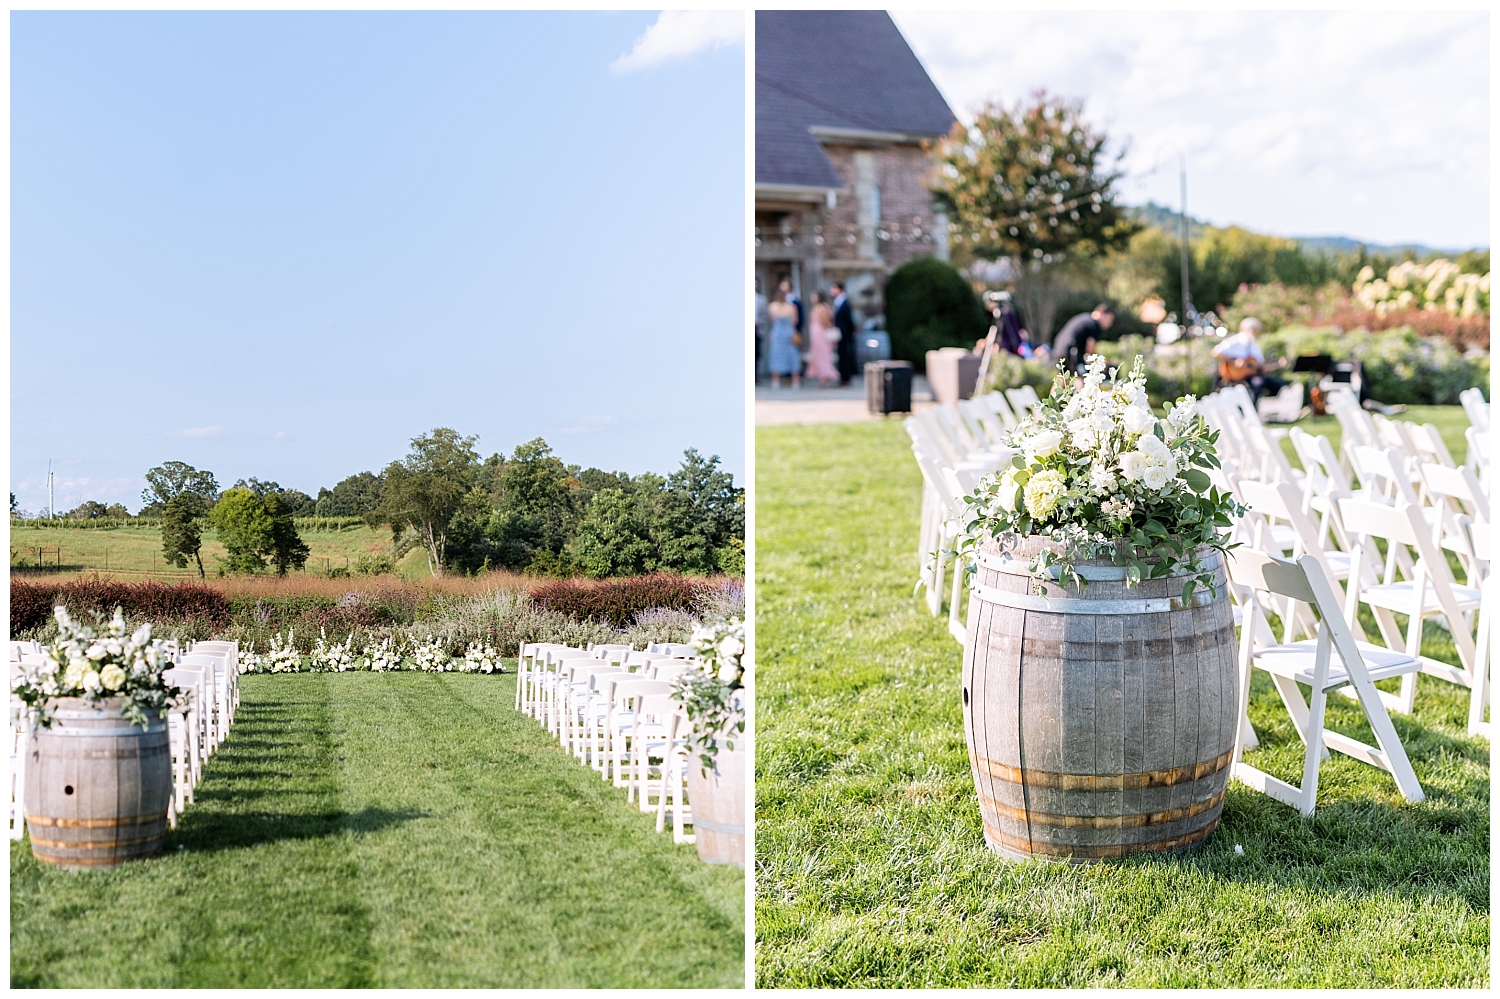 Ceremony details at Early Mountain Vineyard Wedding